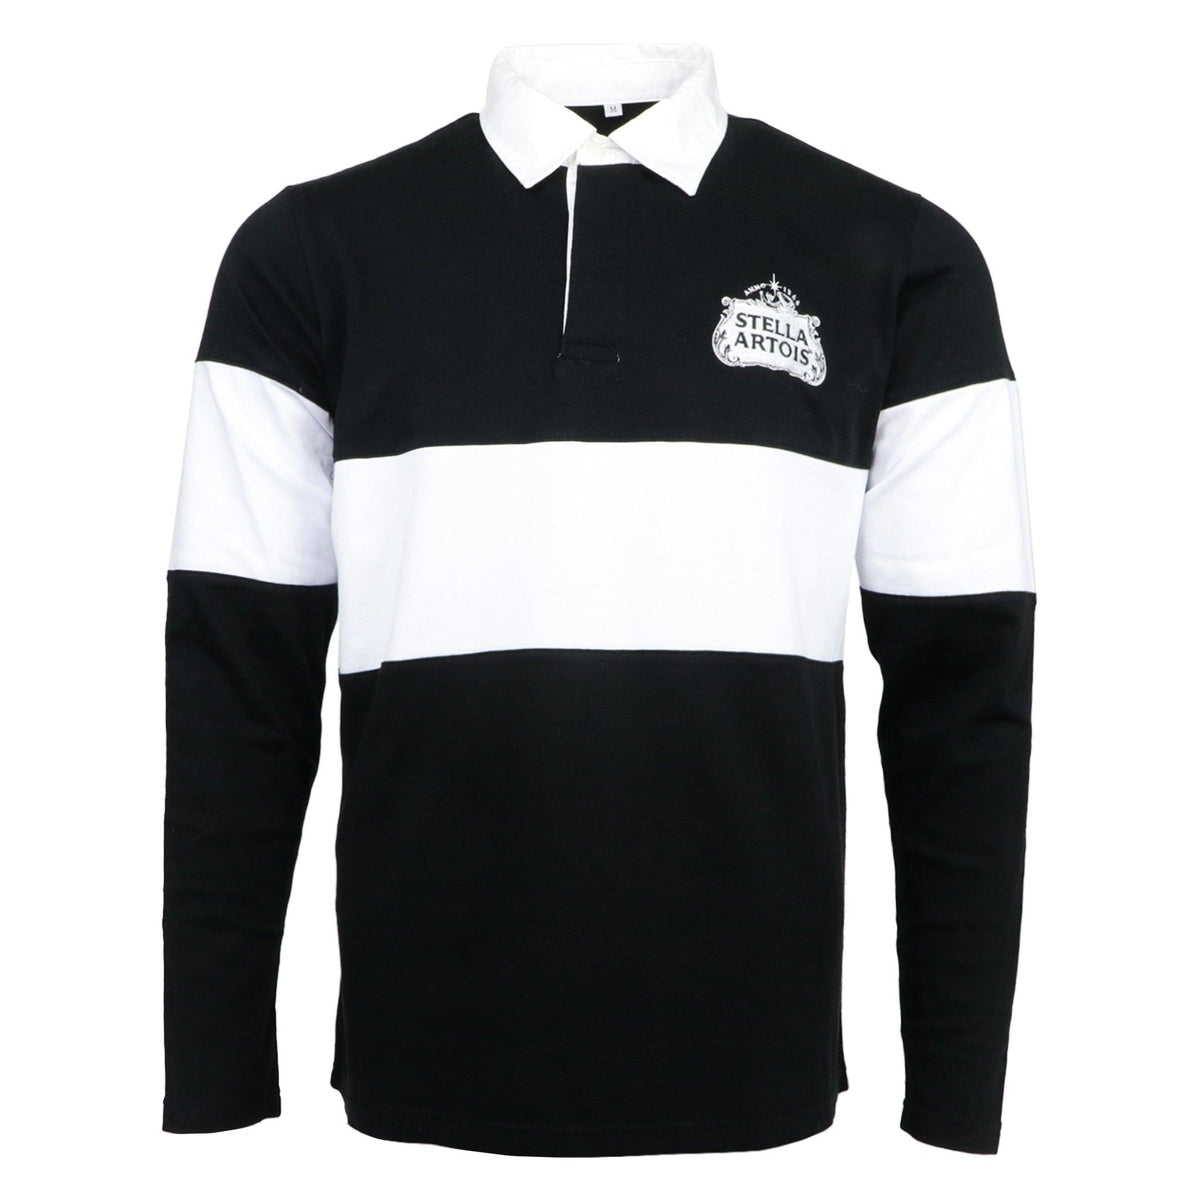 https://www.shopbeergears.shop/wp-content/uploads/1692/92/every-customer-is-treated-as-if-they-were-a-part-of-our-family-helping-people-to-find-the-site-refresh-stella-artois-rugby-striped-shirt-stella-artois_0.jpg